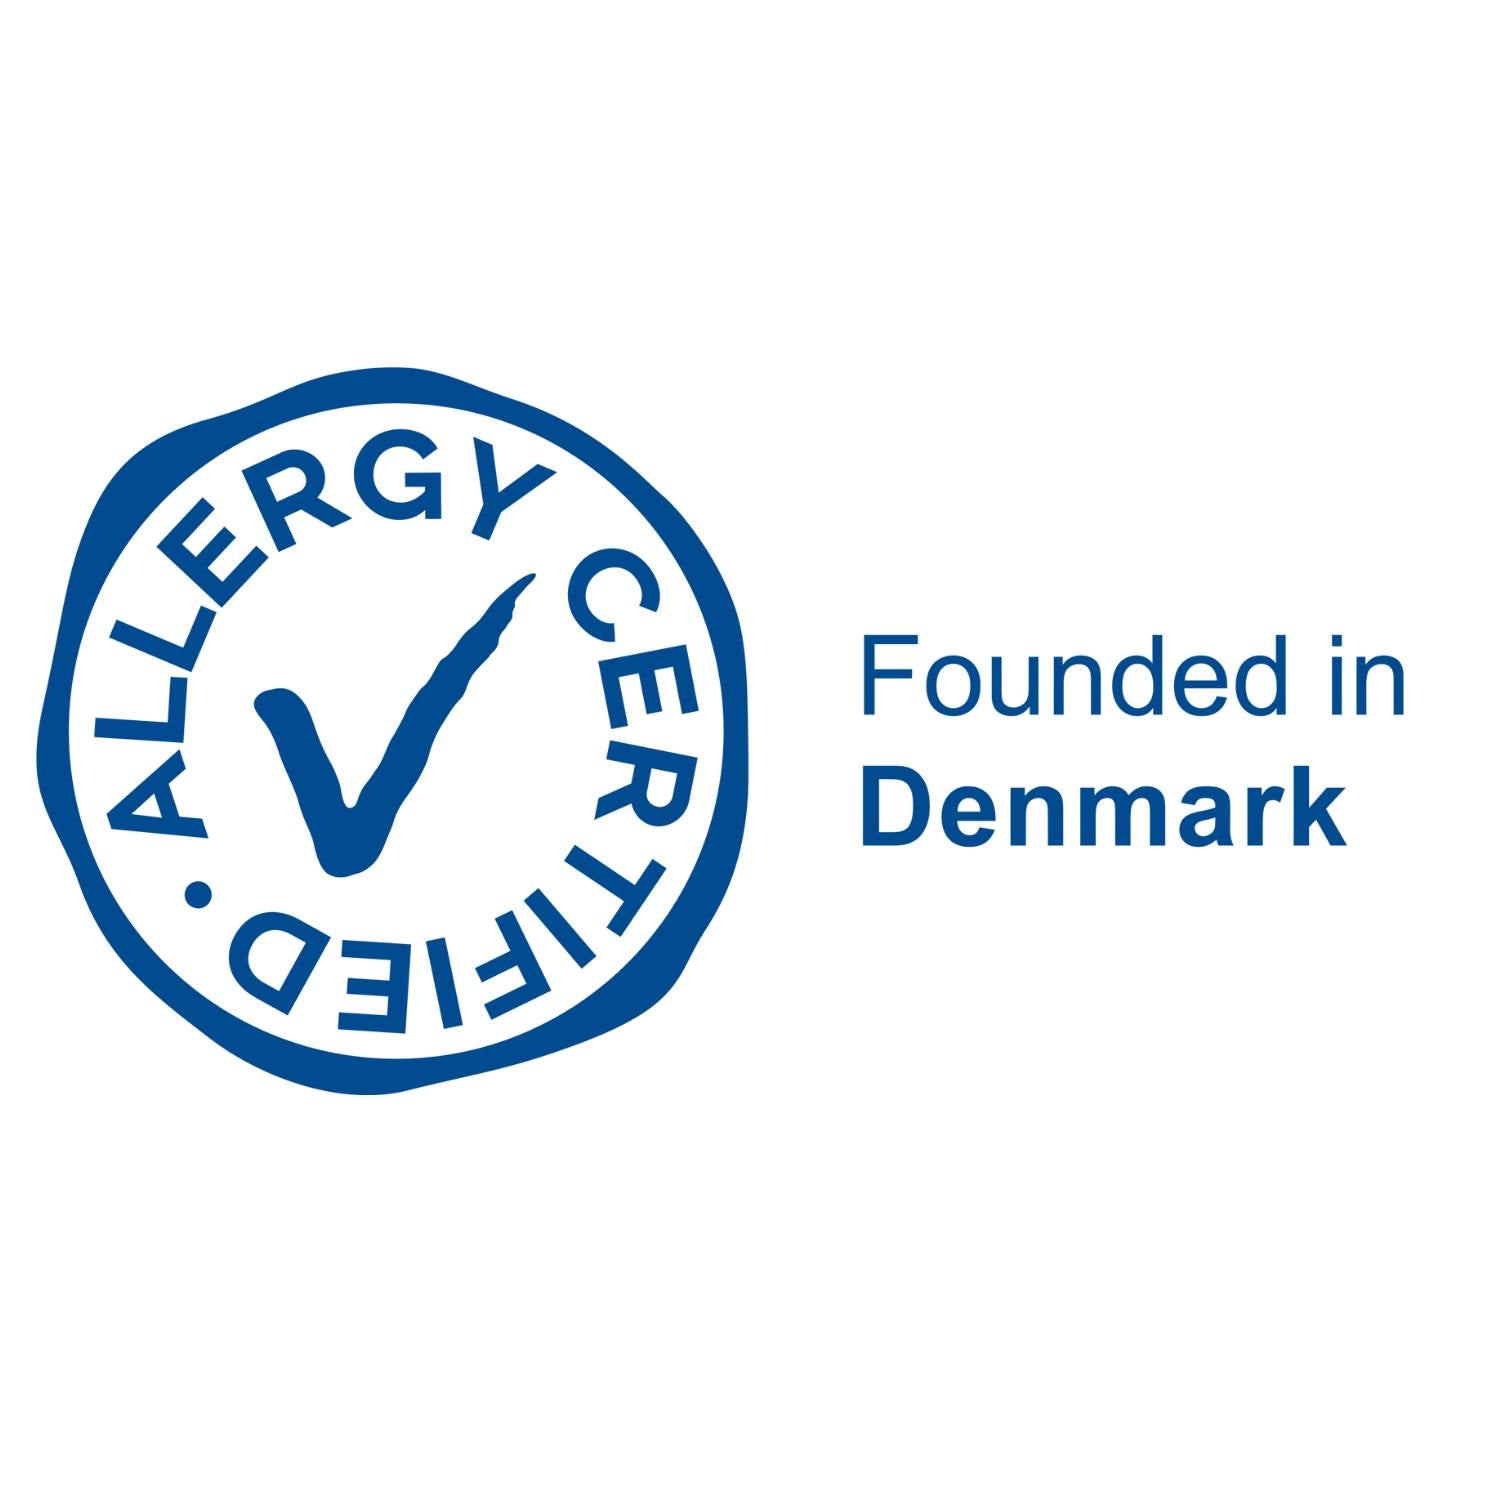 Allergy Certifed and Founded in Denmark